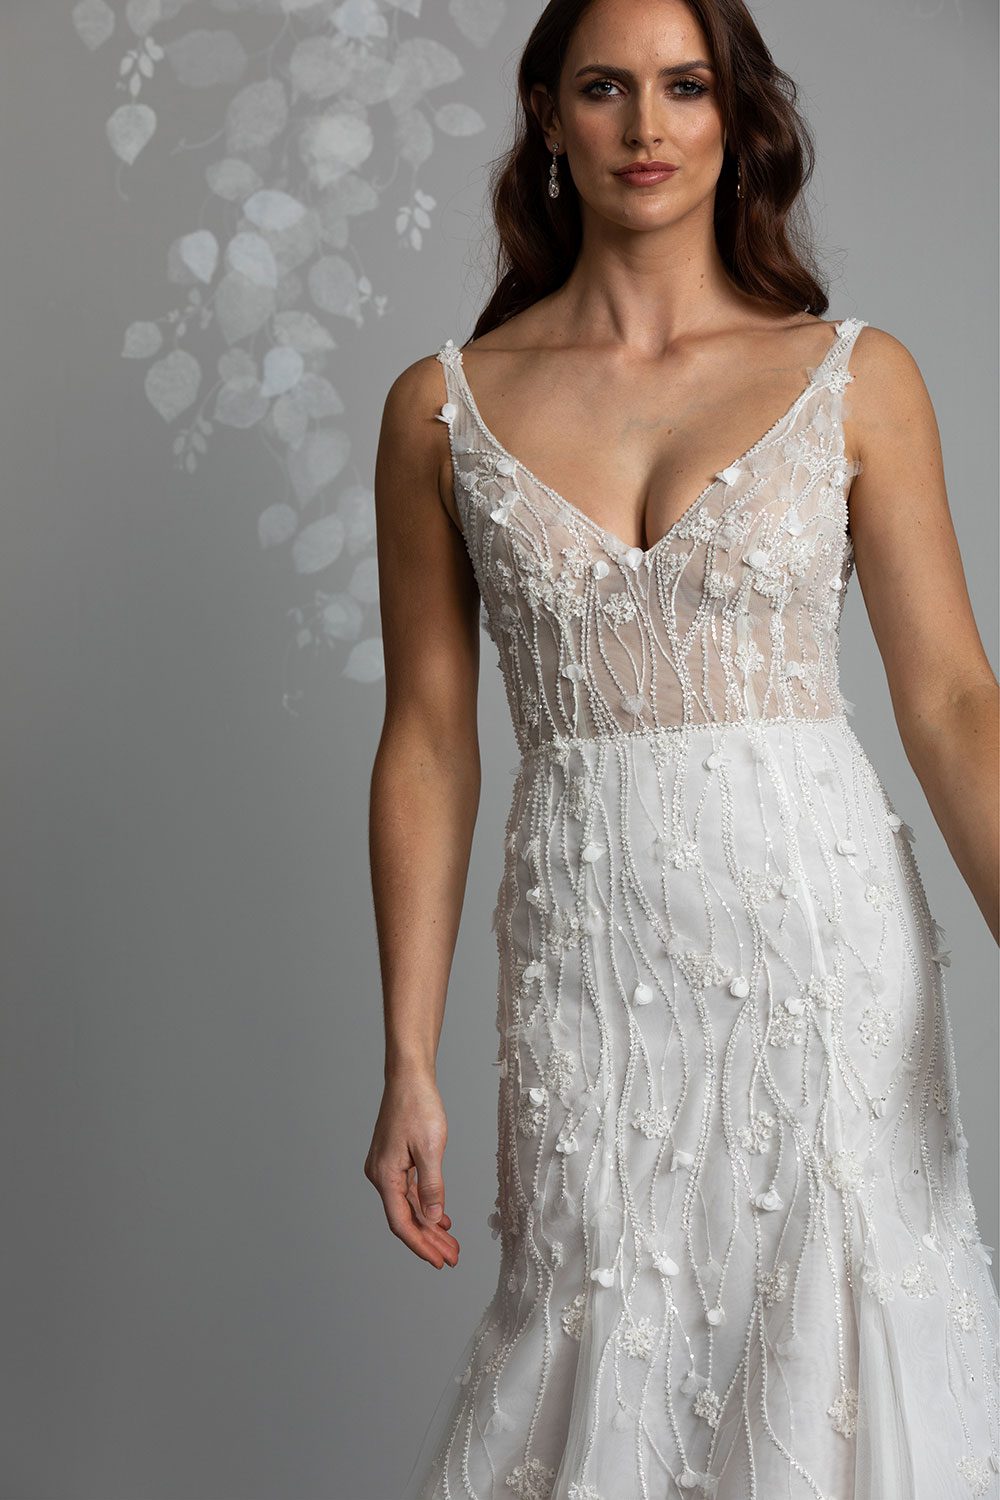 Bronte Wedding Dress by Vinka Design - Featuring a form sculpting mermaid silhouette that embraces the wearer's curves, and intricately embroidered, beaded, botanical lace that trails seamlessly from the bodice into the skirt. Crafted on a semi-sheer base, the bodice boasts a V-neckline and beautiful low V-back. Artfully constructed with layers of dreamy, yet dramatic silk organza and soft tulle, added flare and fullness is achieved through the skirt which fans into a sweeping opulent train. Full length view of model wearing V-neckline bodice with intricately embroidered beaded botanical lace with a dreamy silk organza and soft tulle skirt